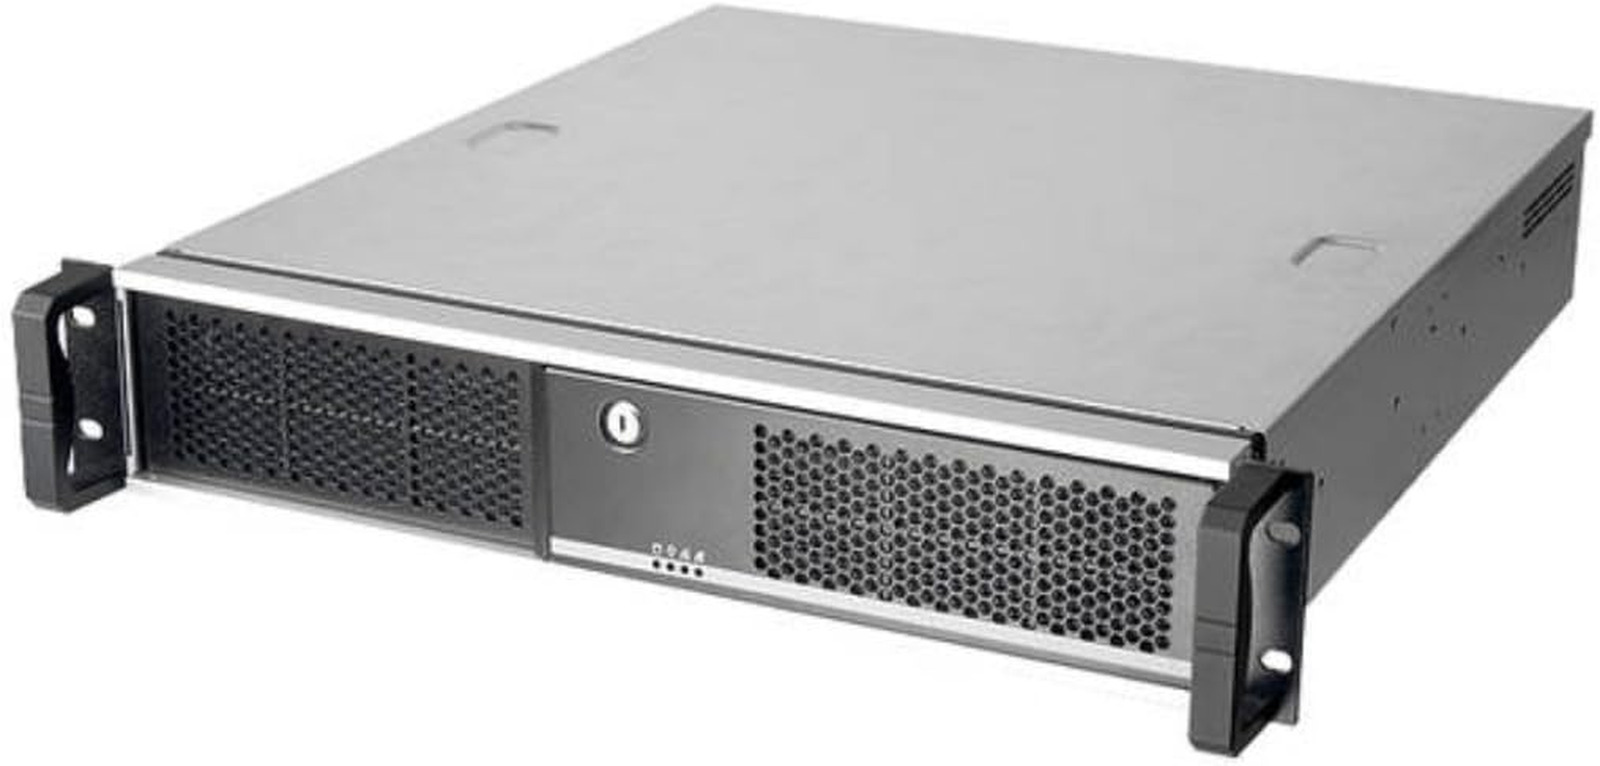 Chassis No Power Supply 2U Feature-Advanced Industrial Server Chassis RM24100-L2